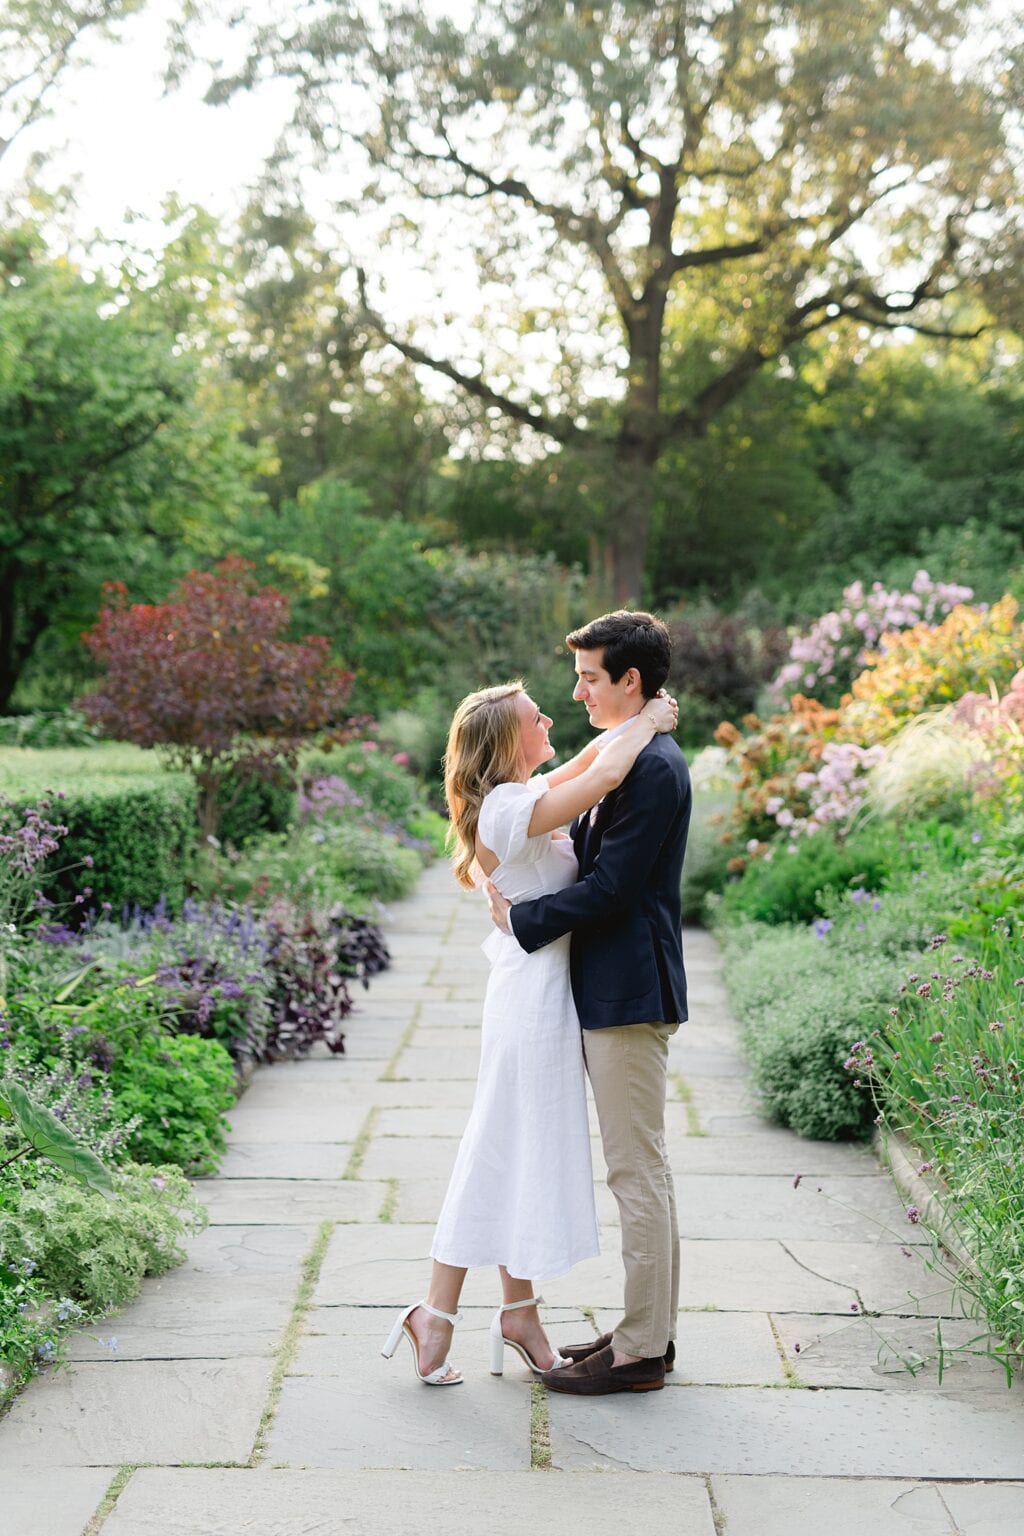 Mary Kate & Michael | Engagement Session in Central Park | Niki Marie ...